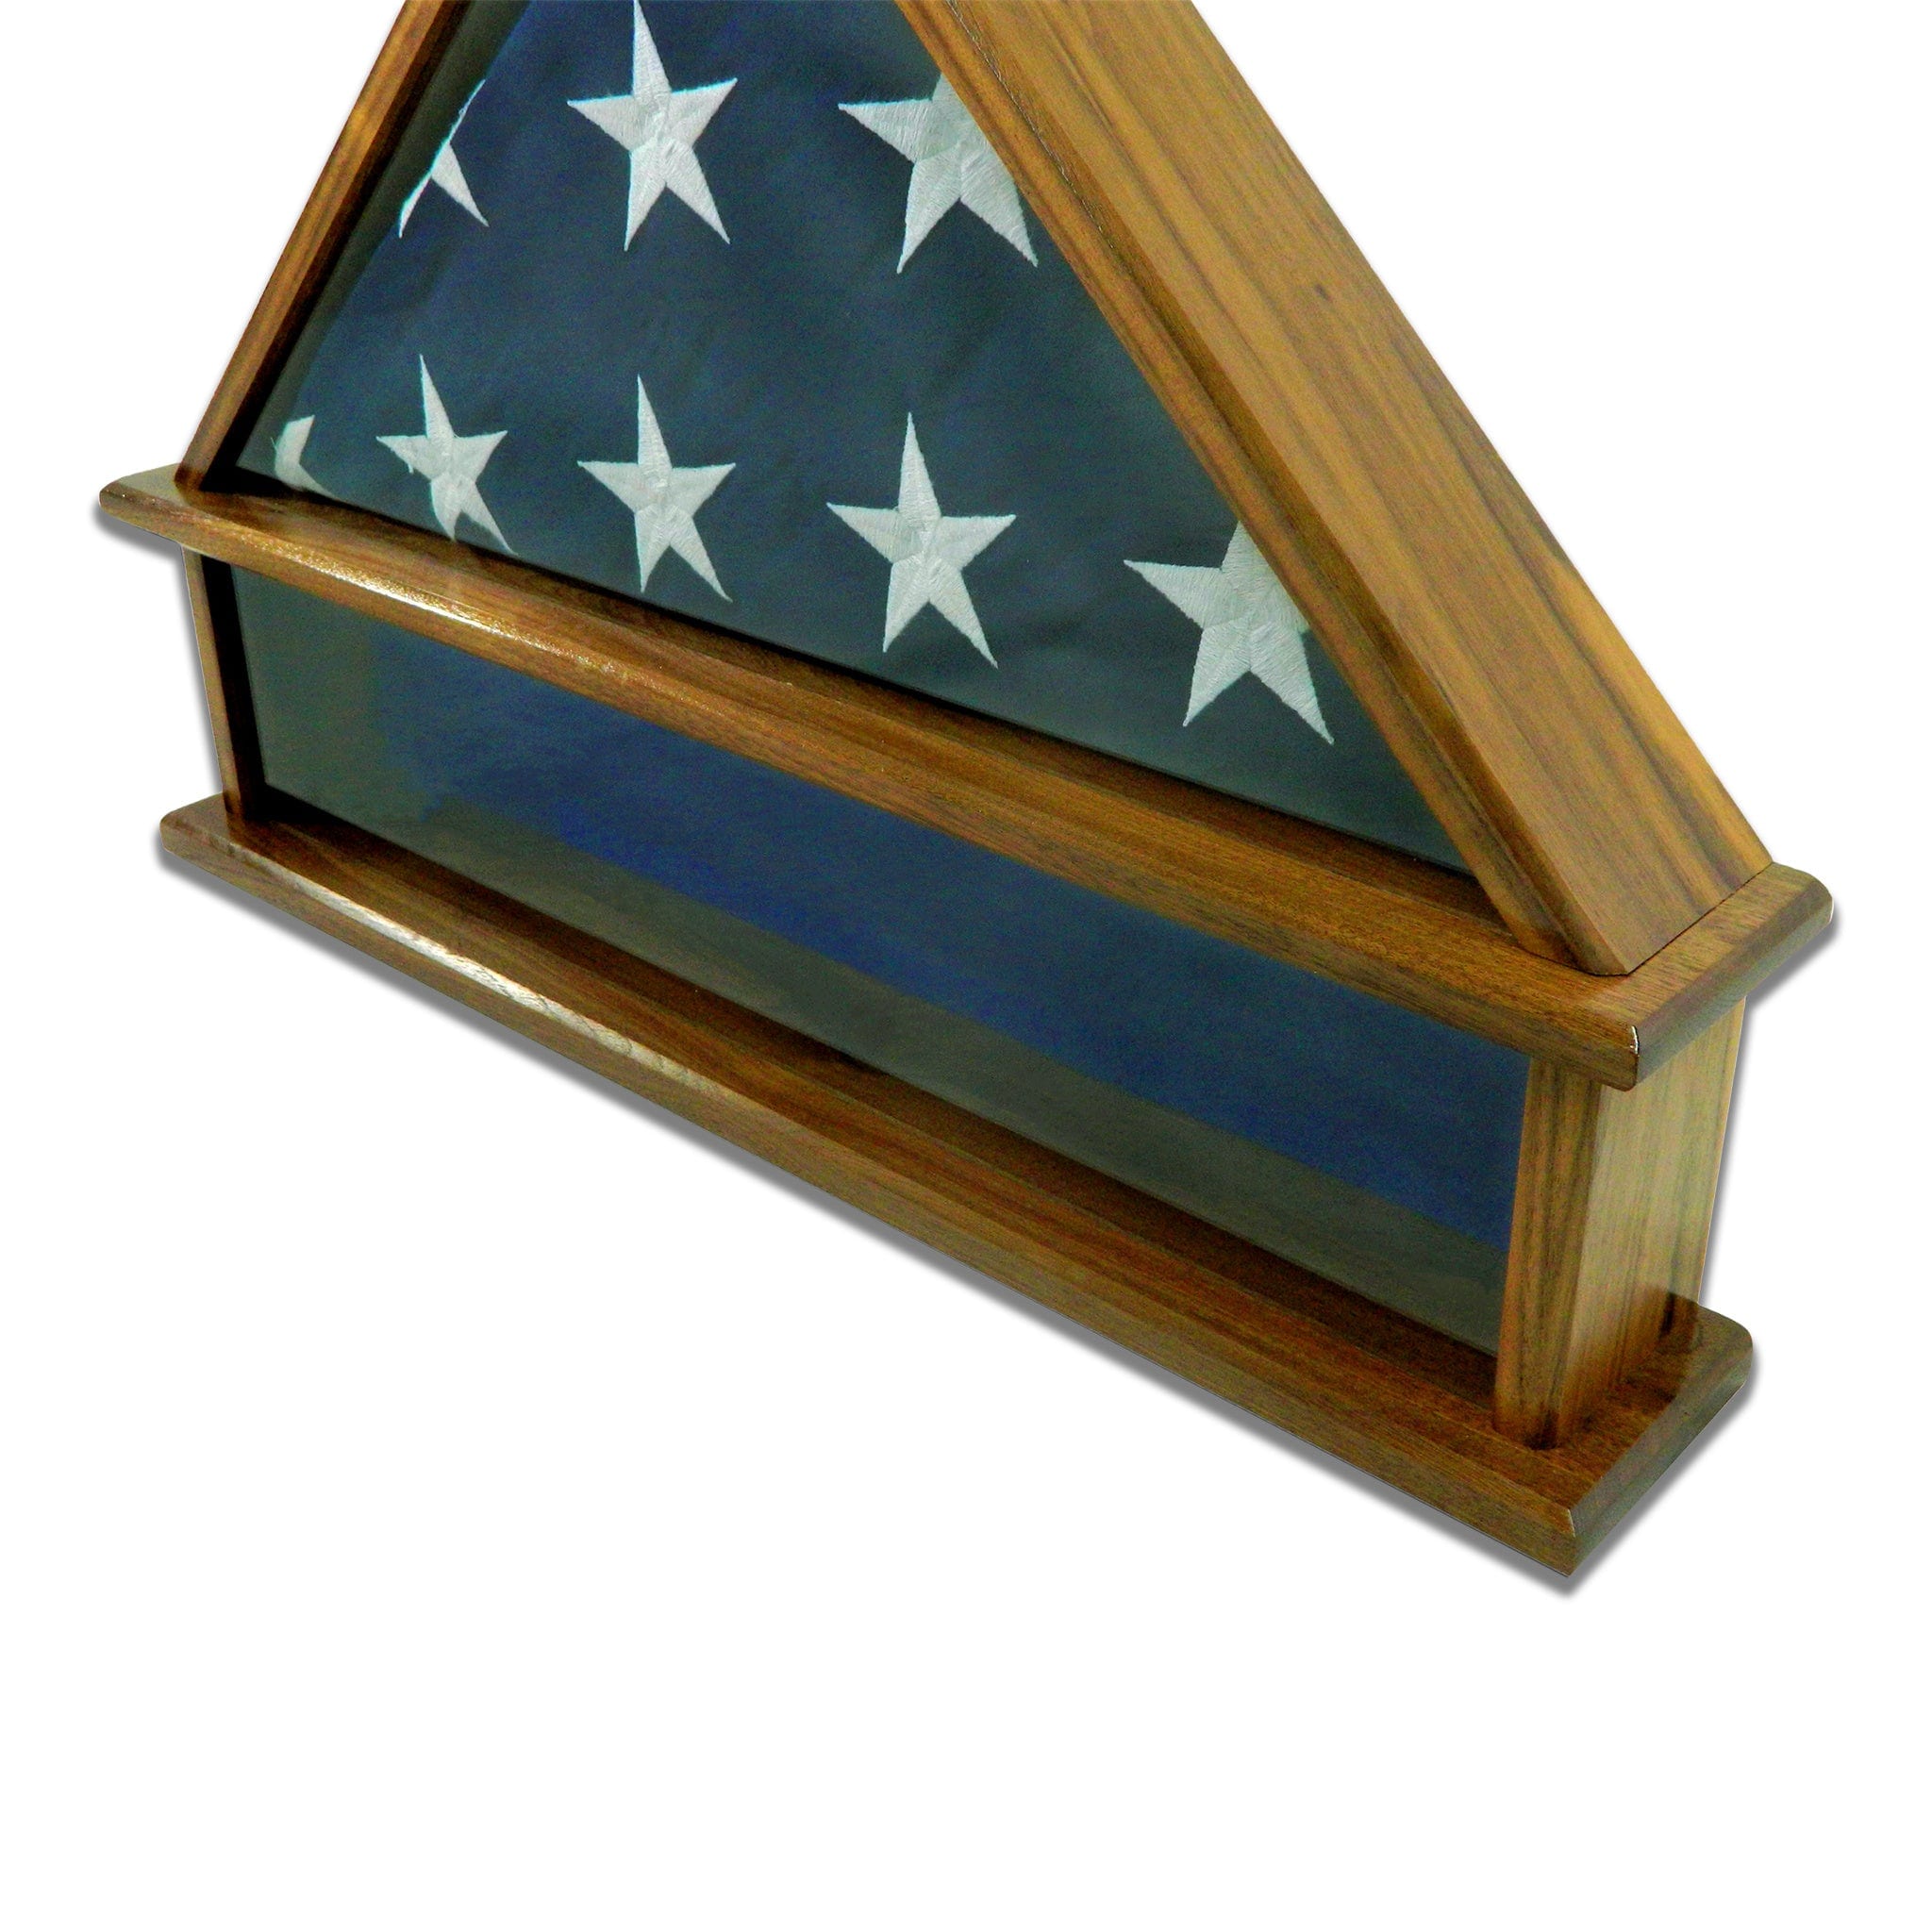 Walnut Burial Flag Display Case with shadow box section for the base. Holds a 5'x9.5' Burial Flag.